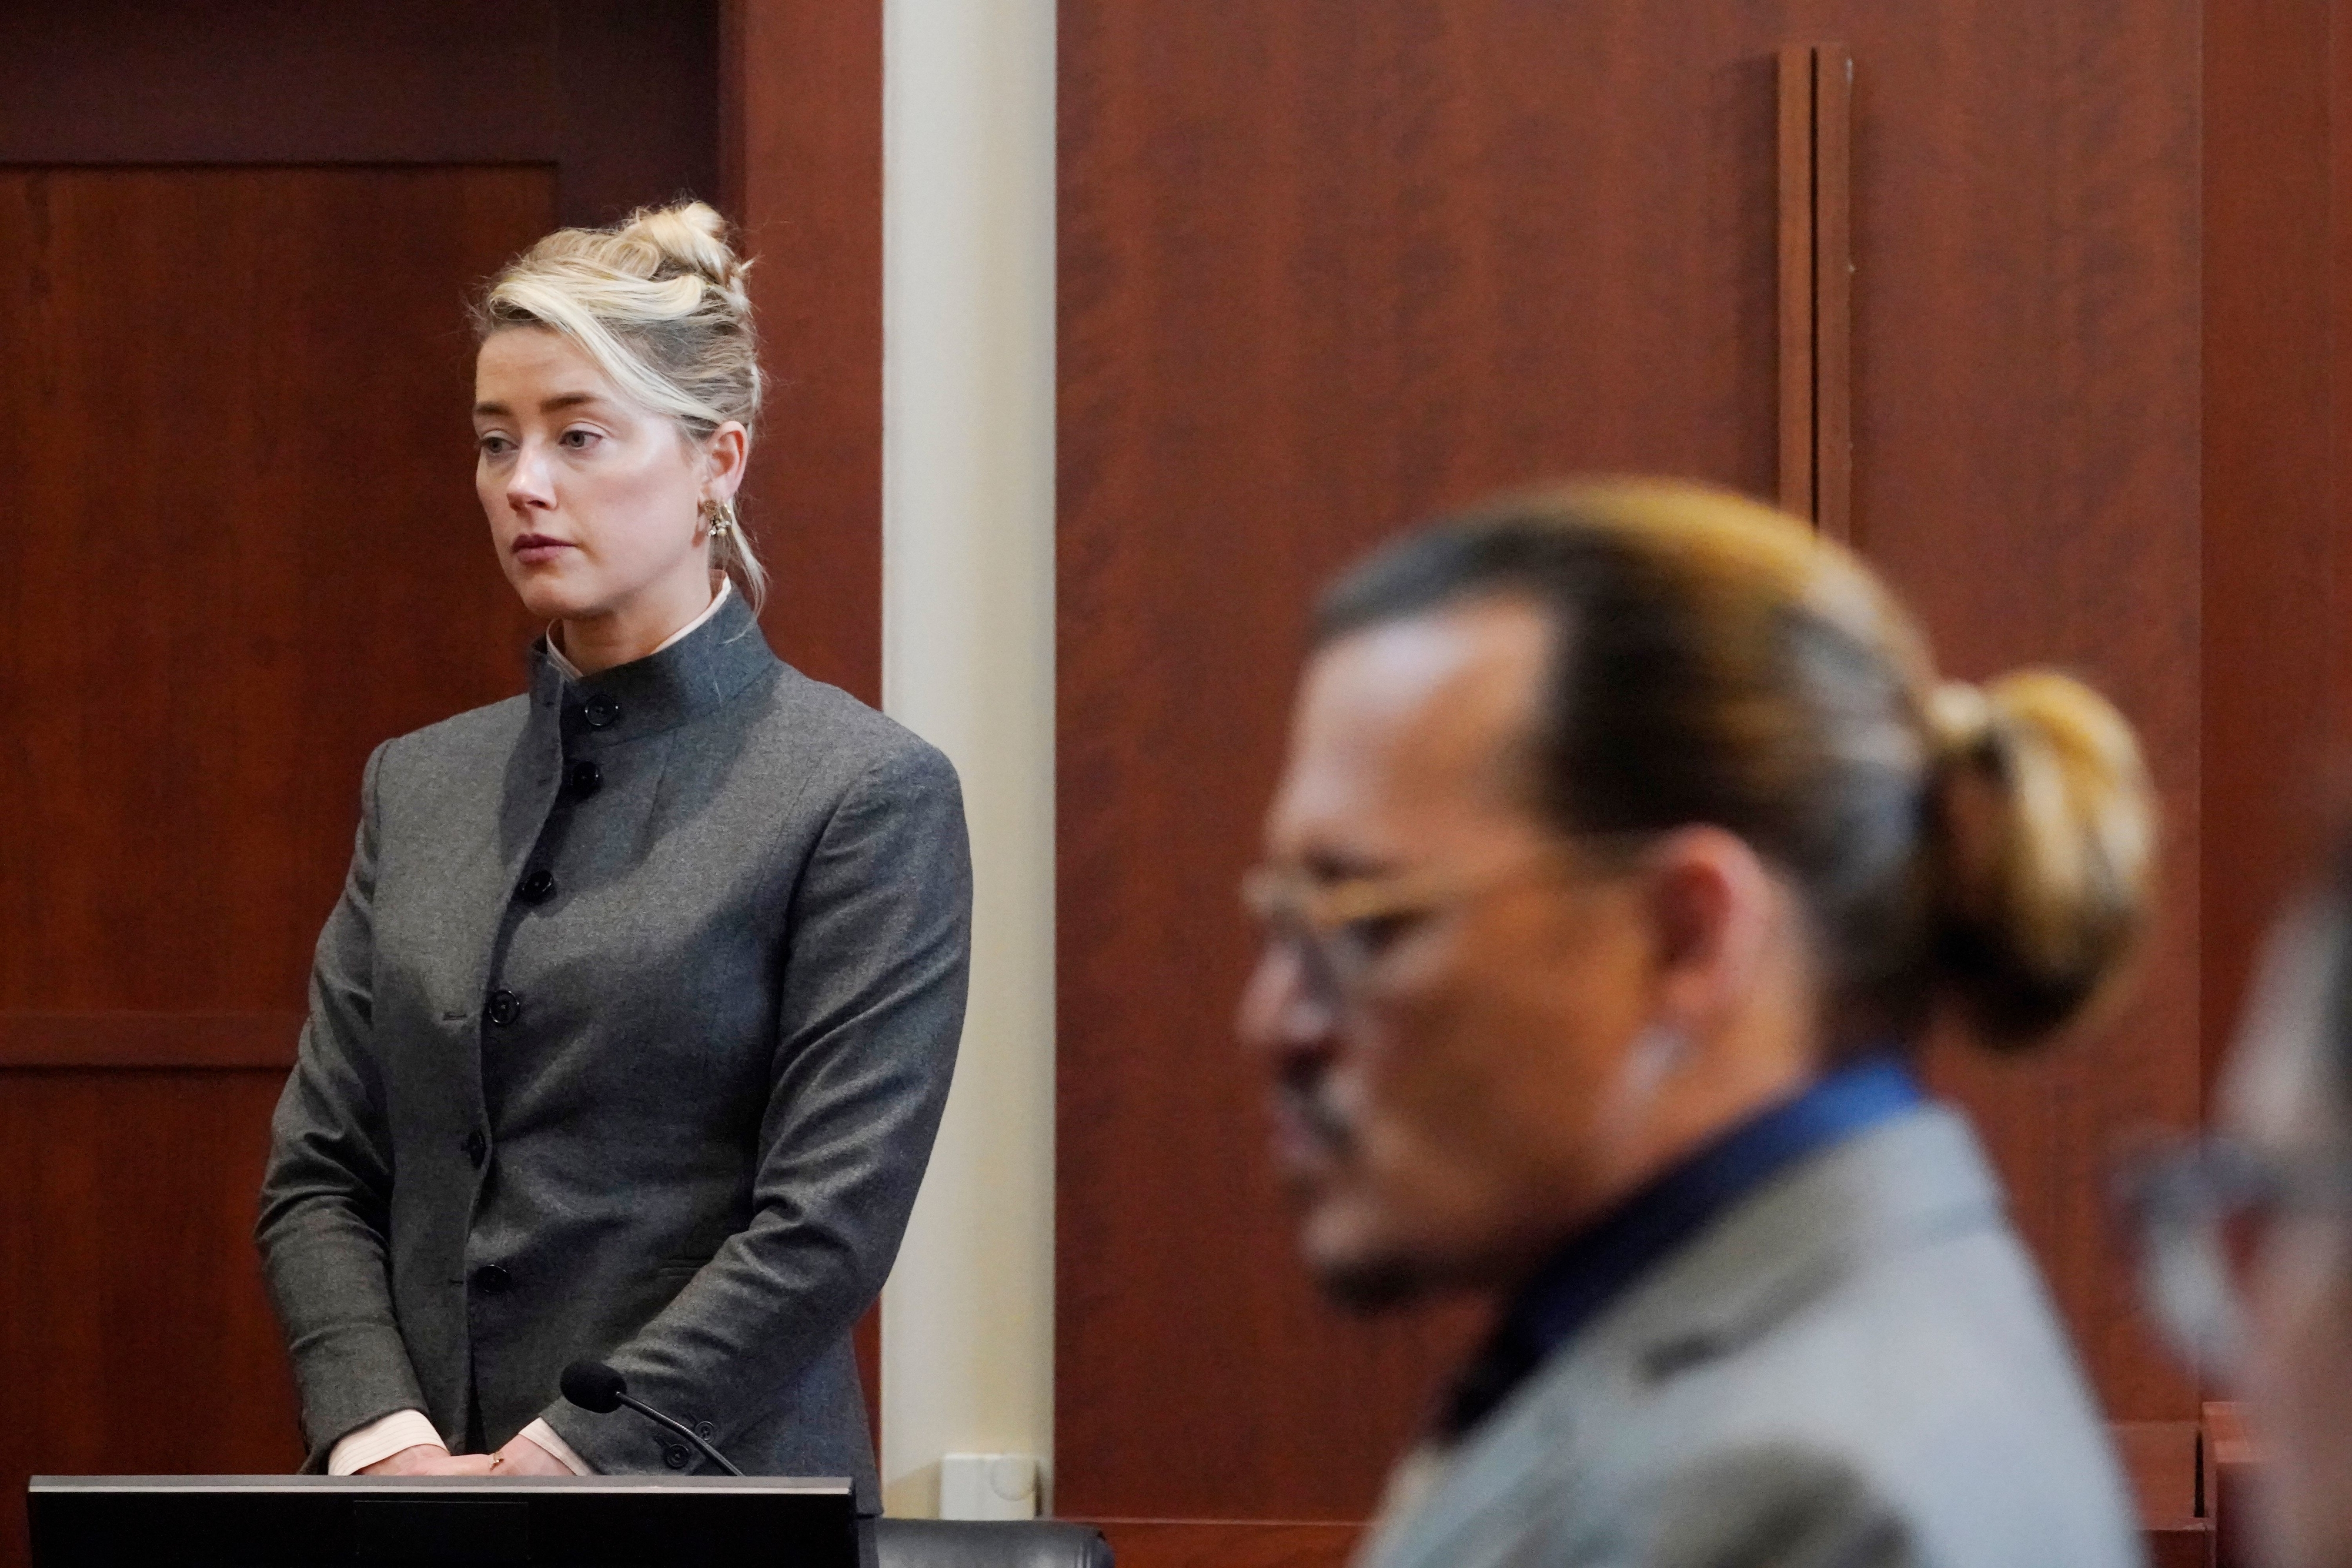 Amber Heard standing in court, wearing a gray suit with her hair up in a bun